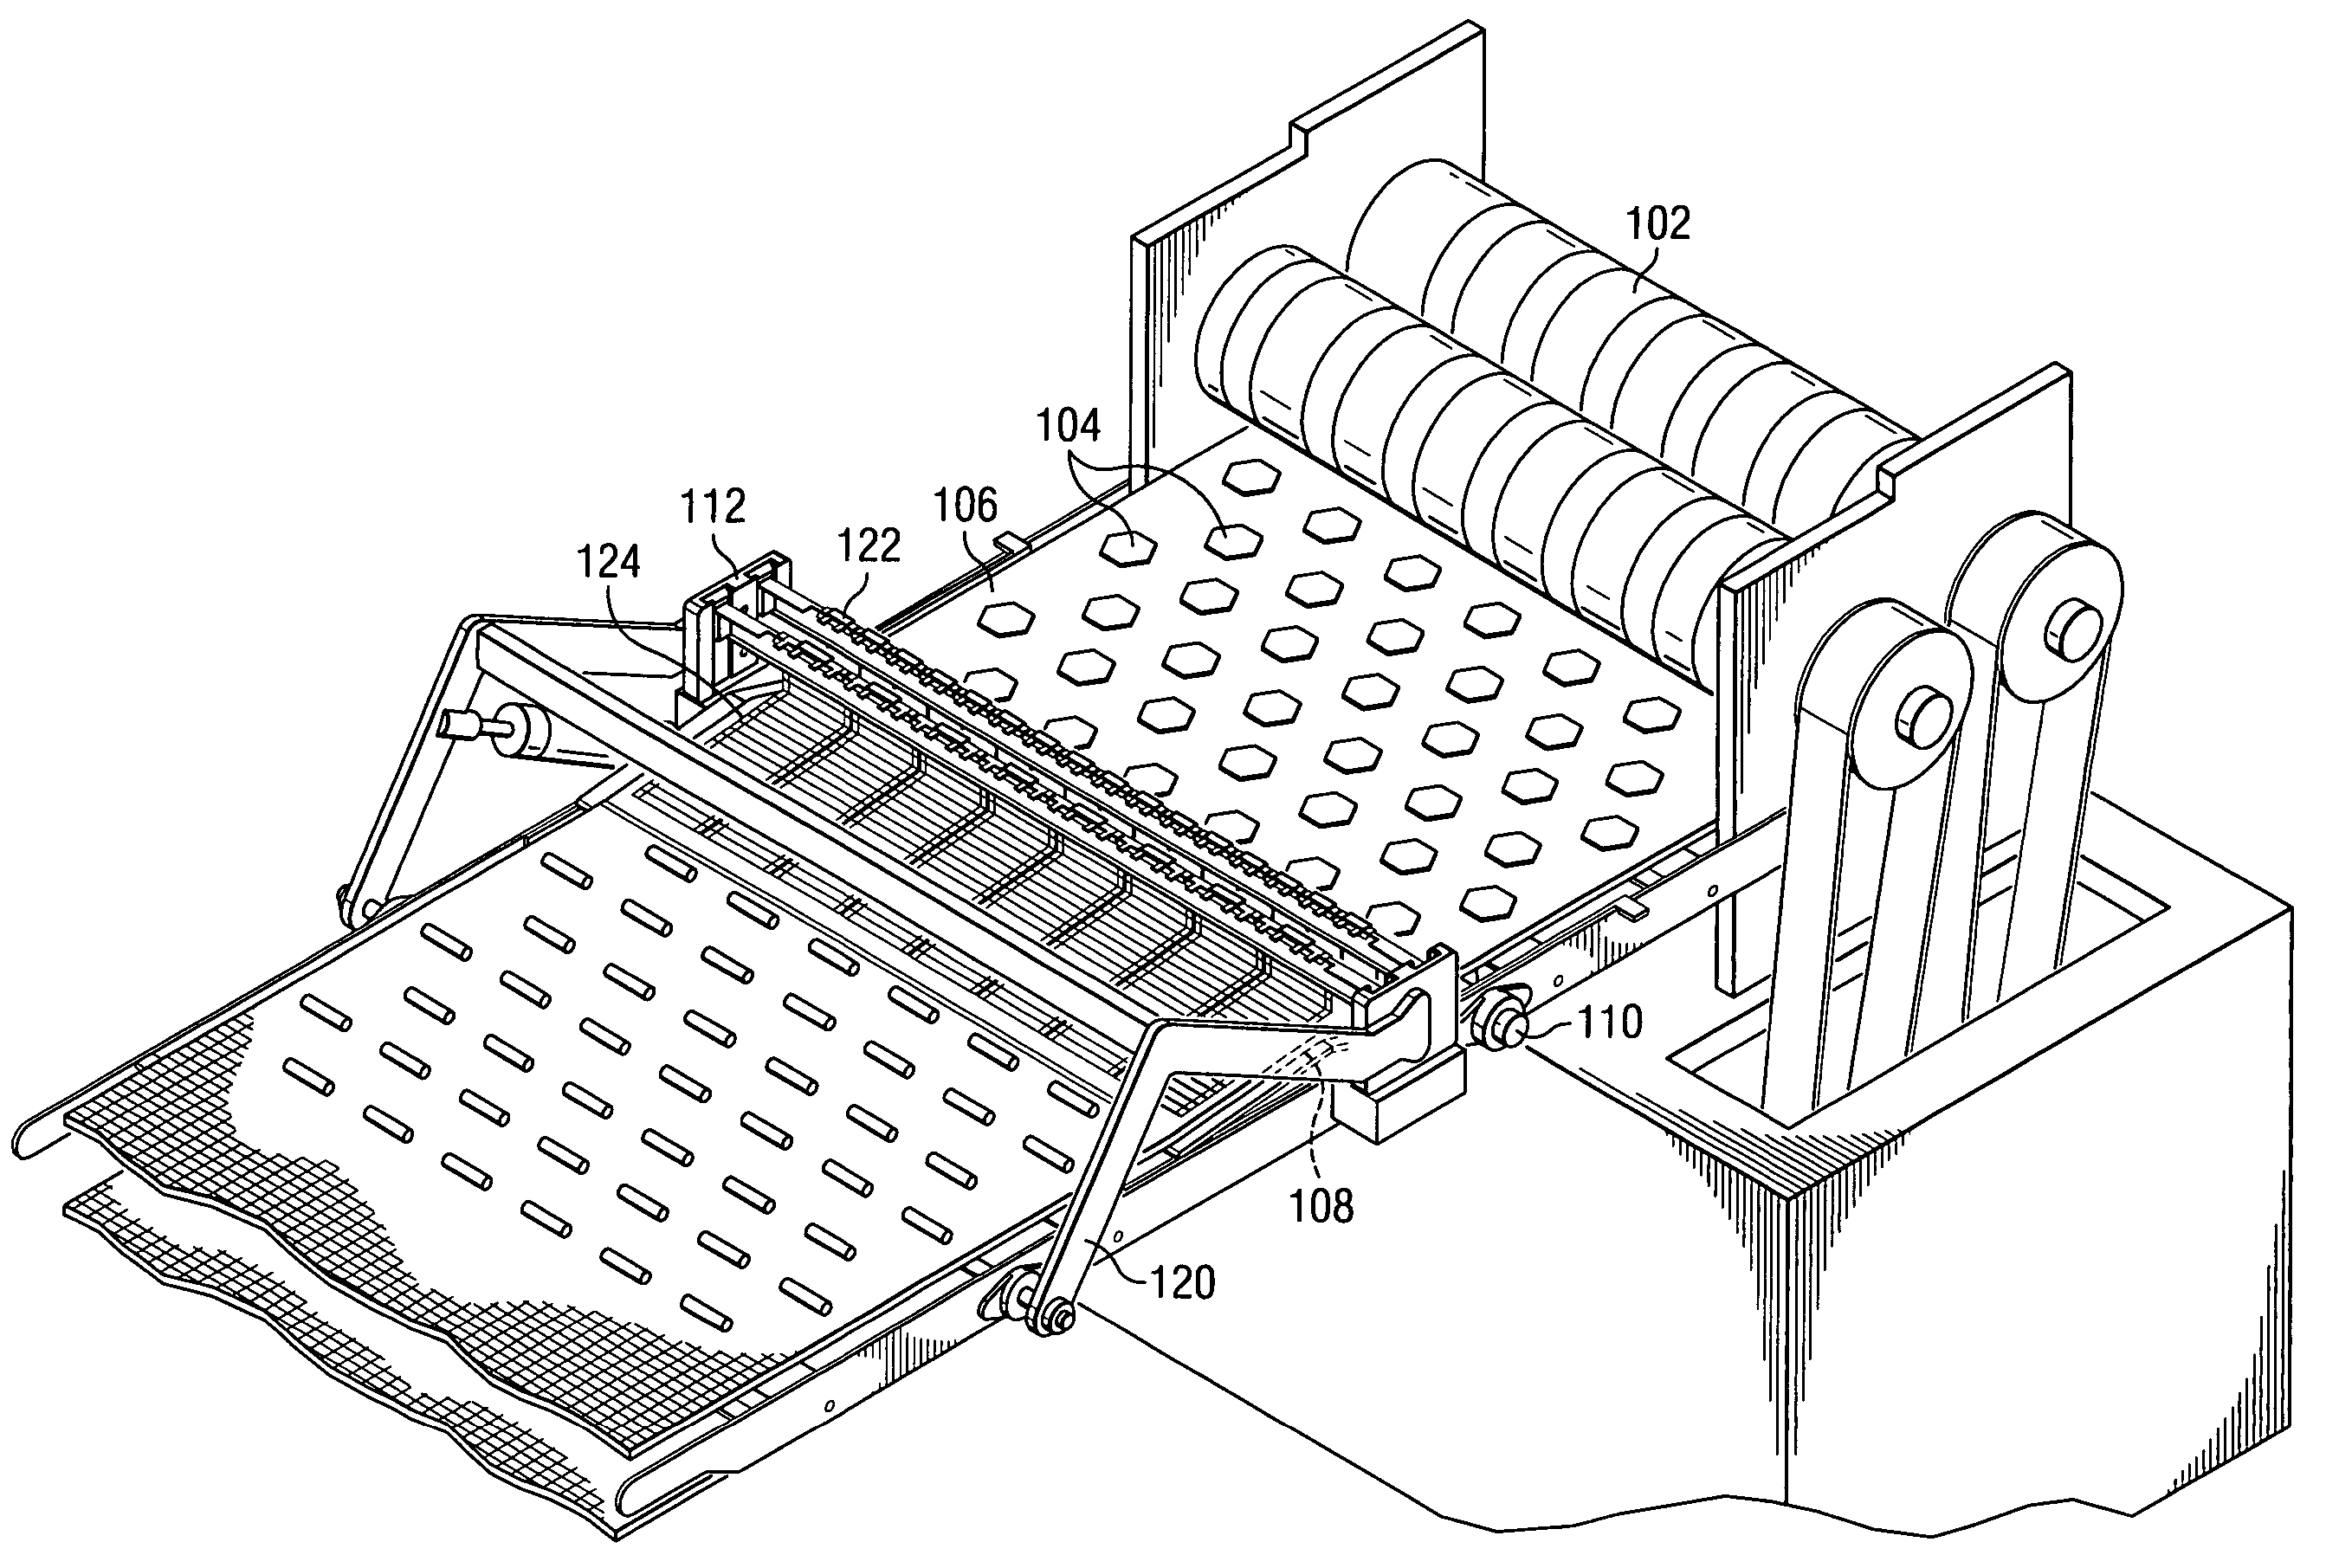 Dough rolling apparatus and method